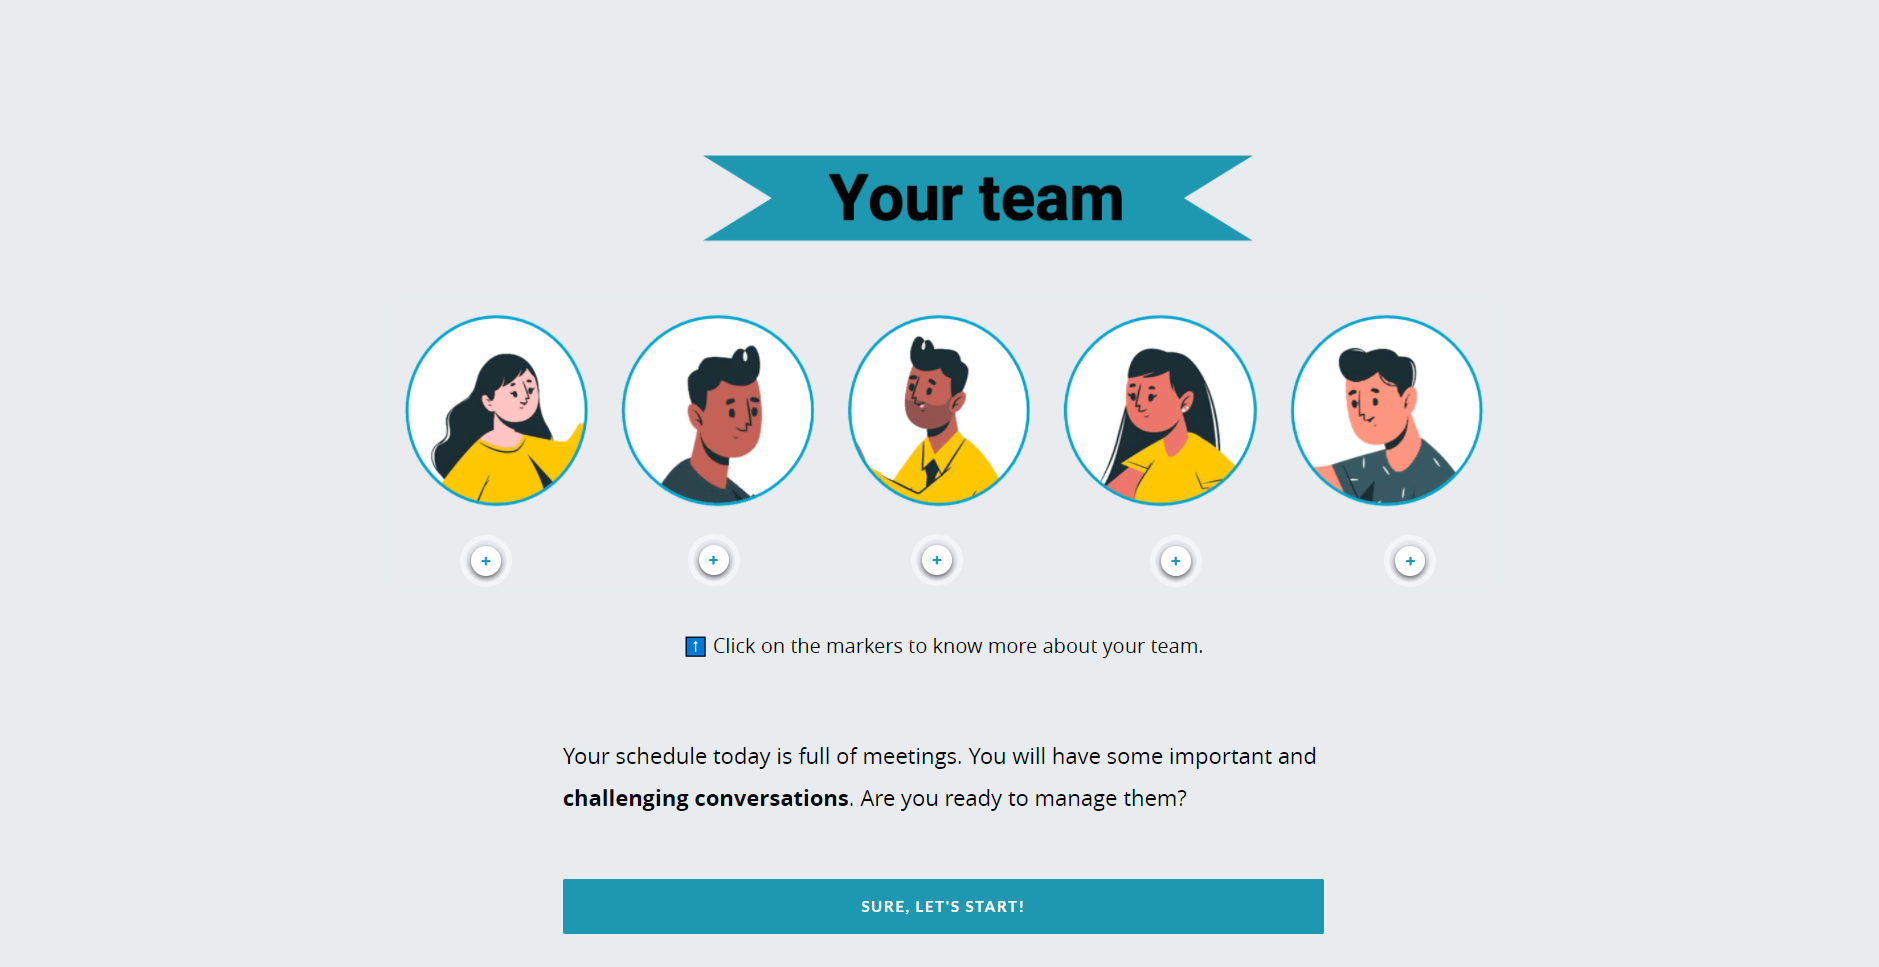 A slide showing fotos of your team members.